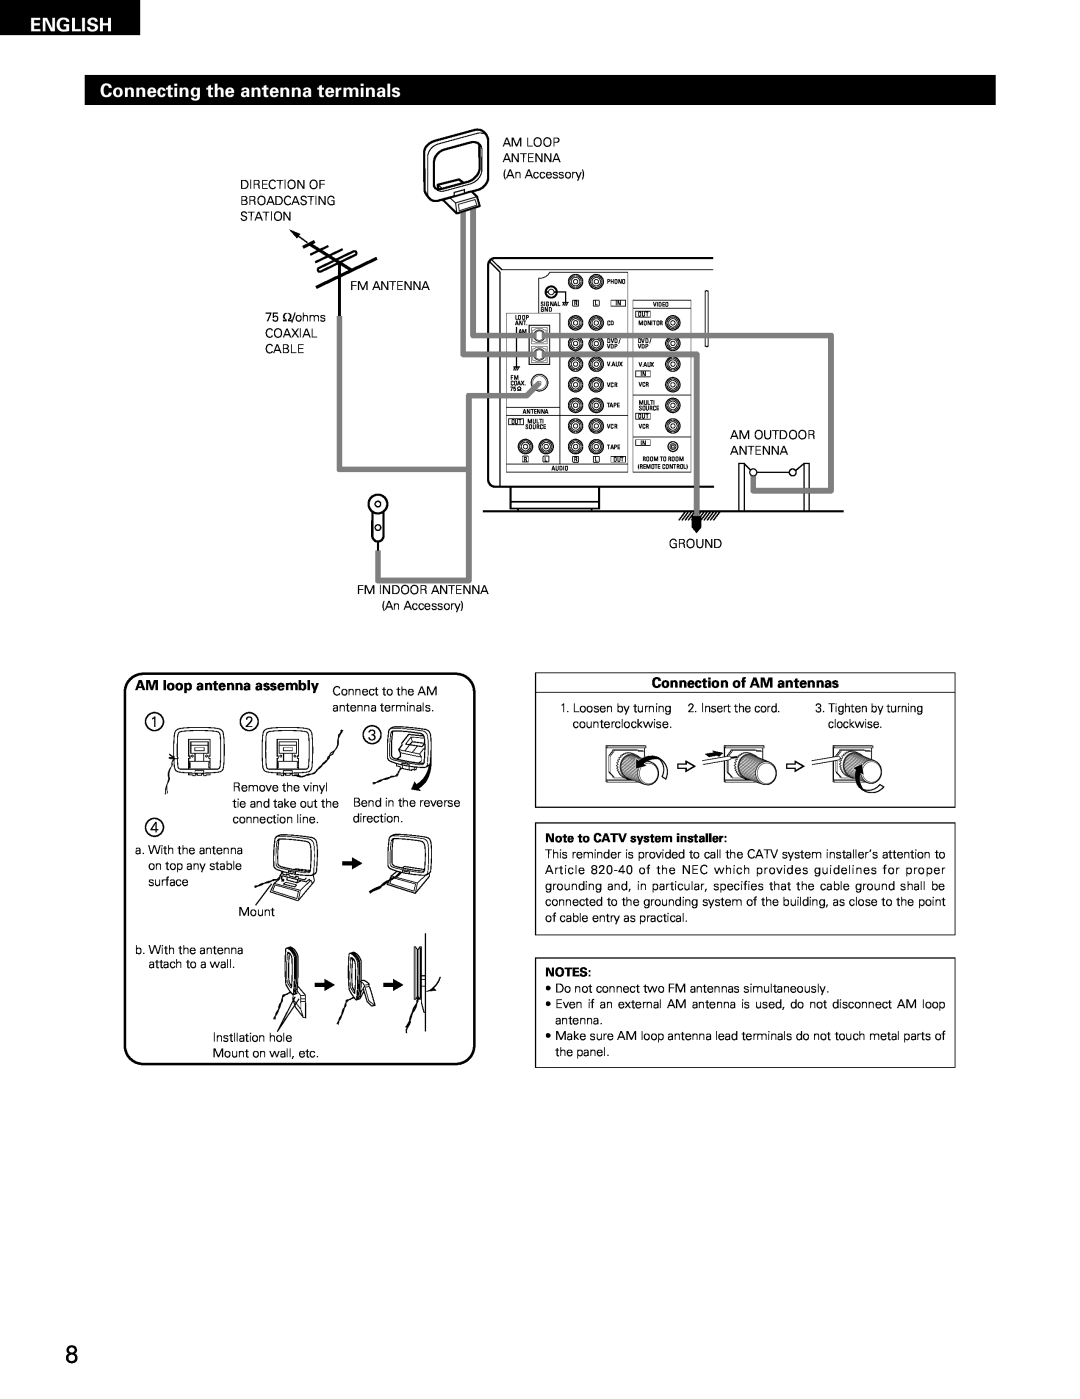 Denon DRA-685 manual ENGLISH Connecting the antenna terminals, Connection of AM antennas, AM loop antenna assembly 